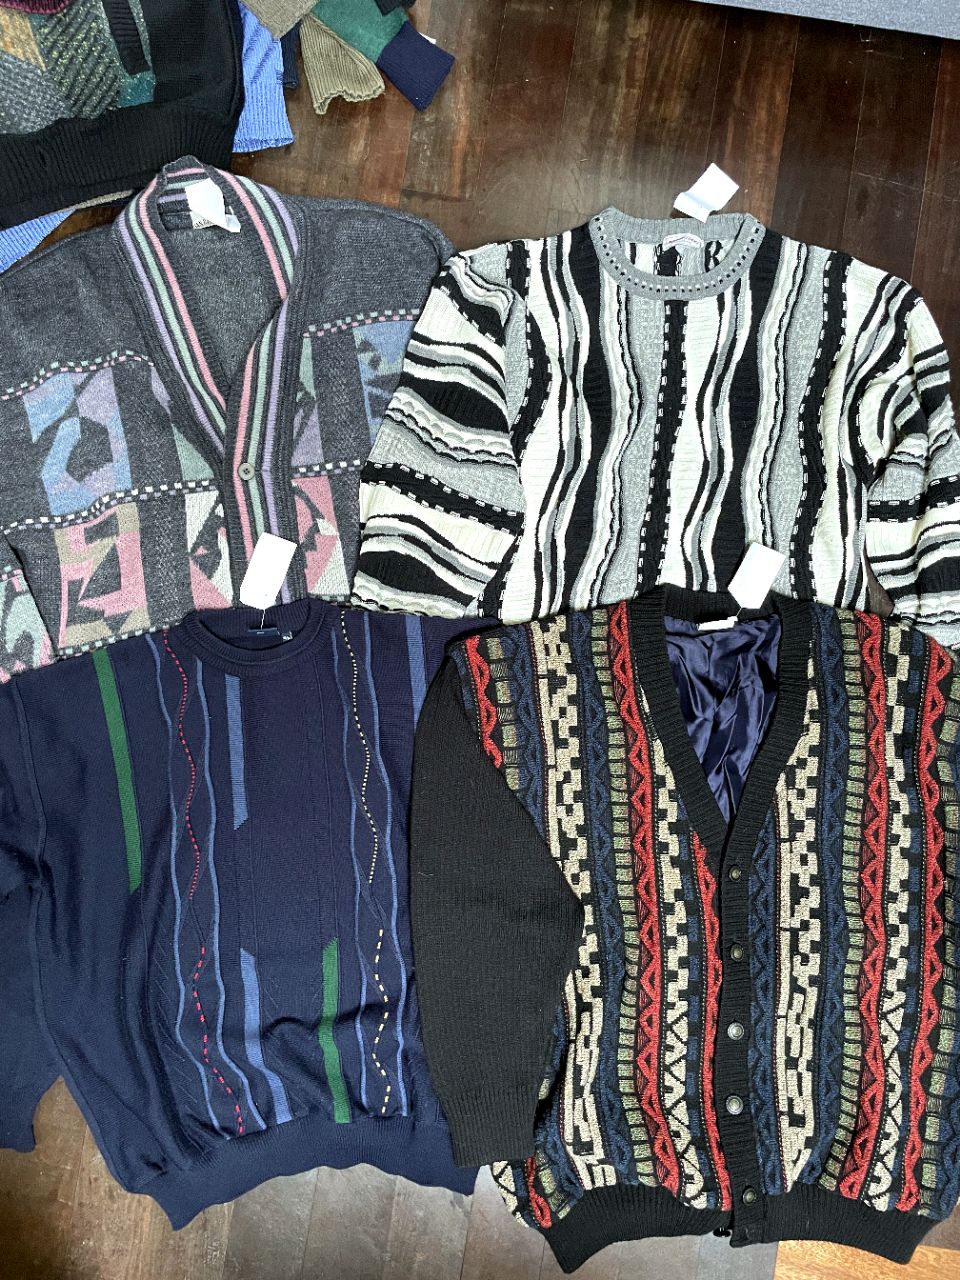 22 x Coogi Style Jumpers Sweaters Colorful